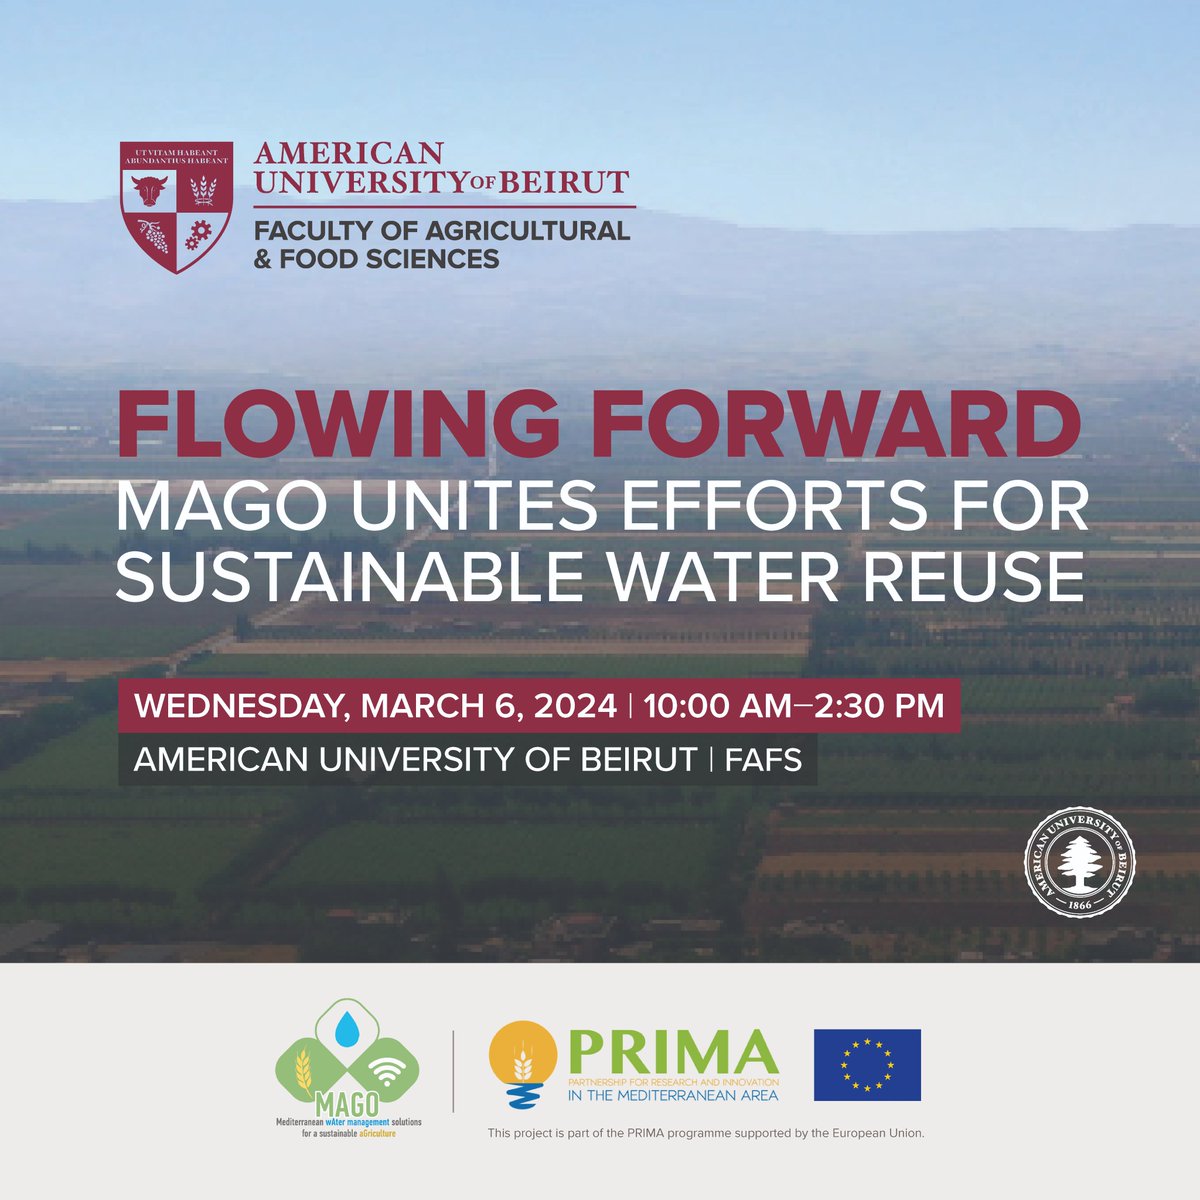 🌊Join us to discuss sustainable water reuse strategies. Together, let's assess technical, economic, & operational readiness levels & formulate a sustainable water reuse plan in Lebanon. Register today: form.jotform.com/240513155145447